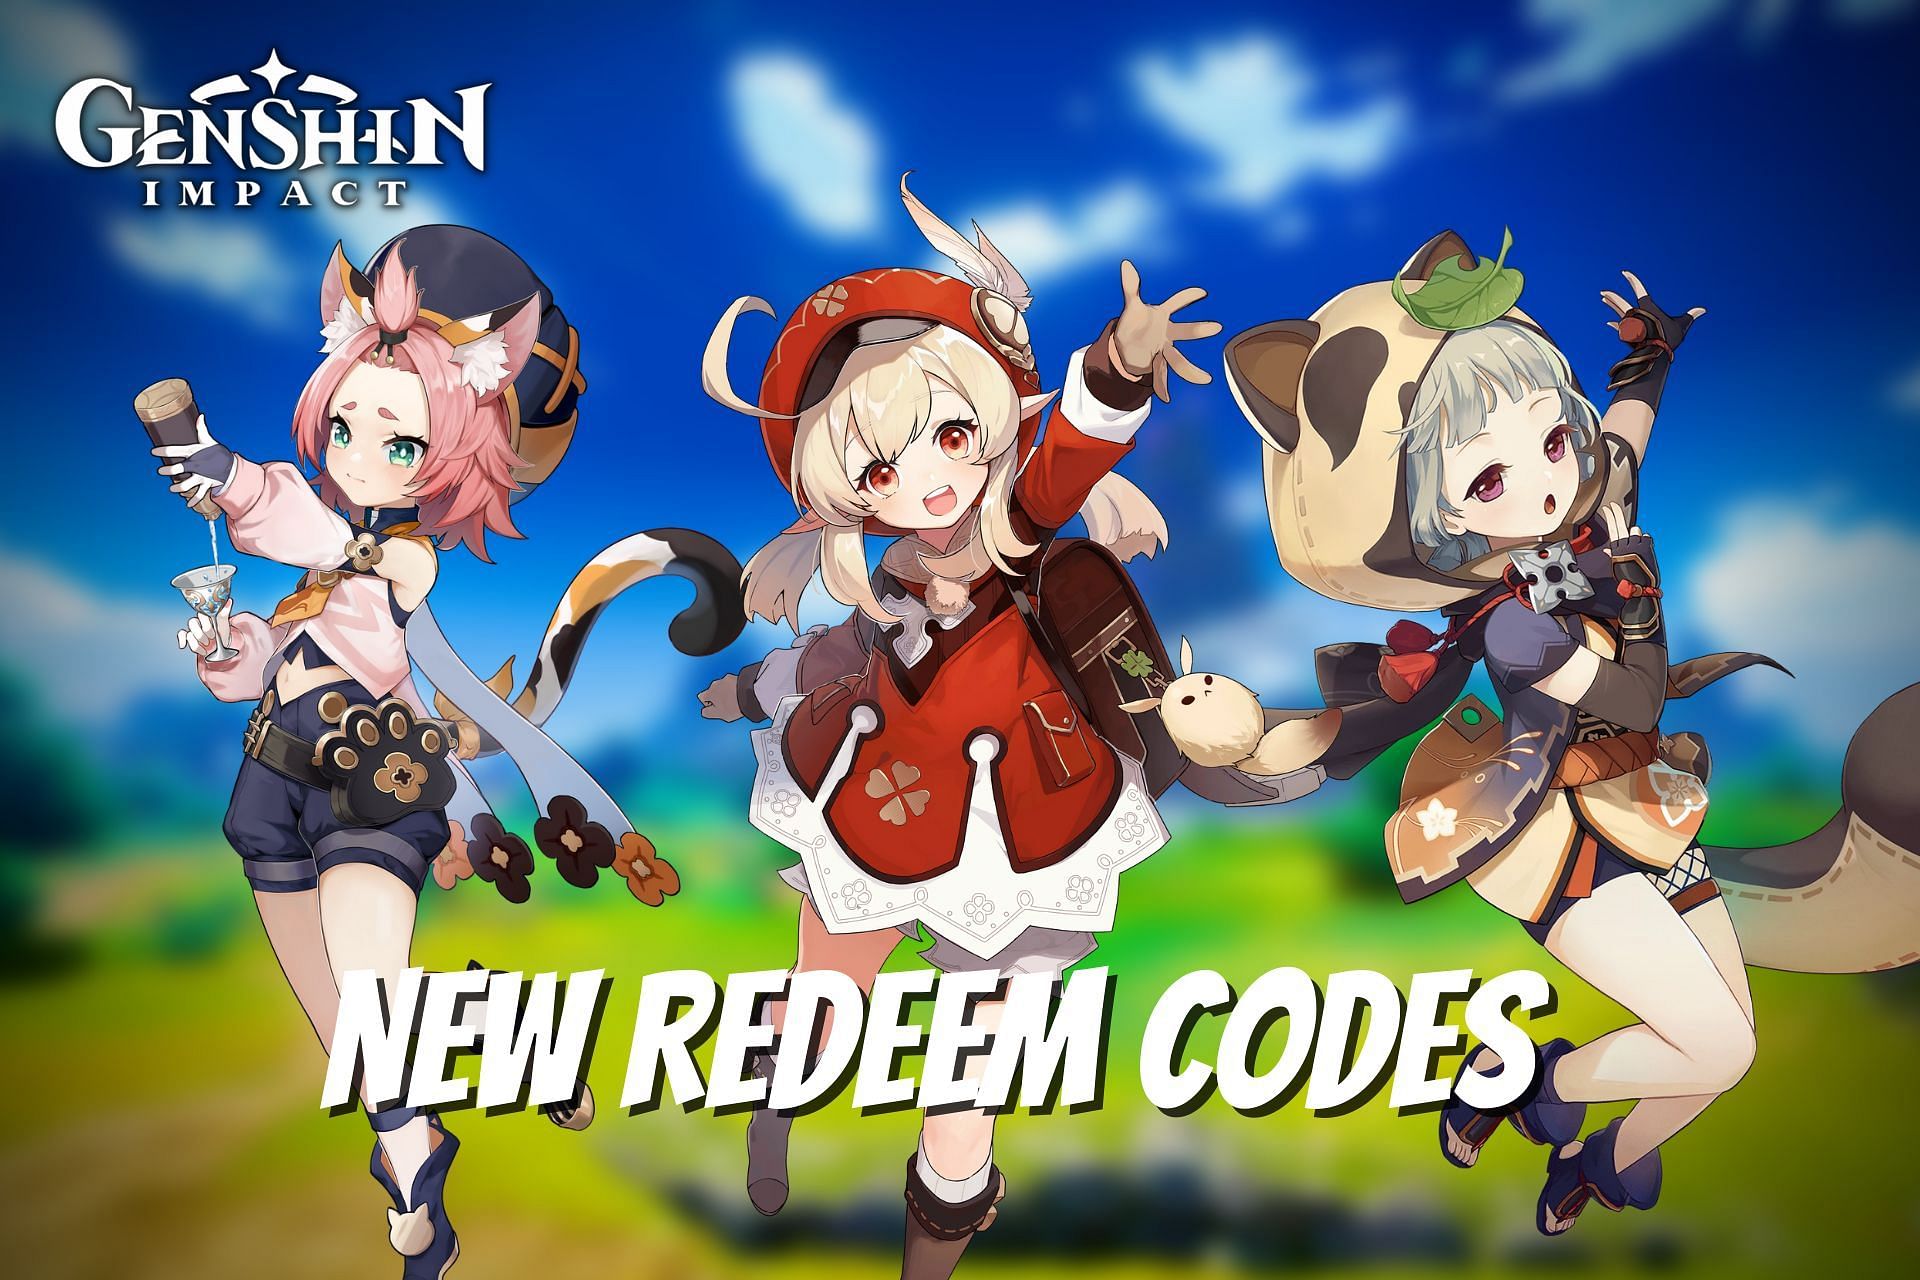 How to redeem Genshin Impact codes on mobile and PC to get free